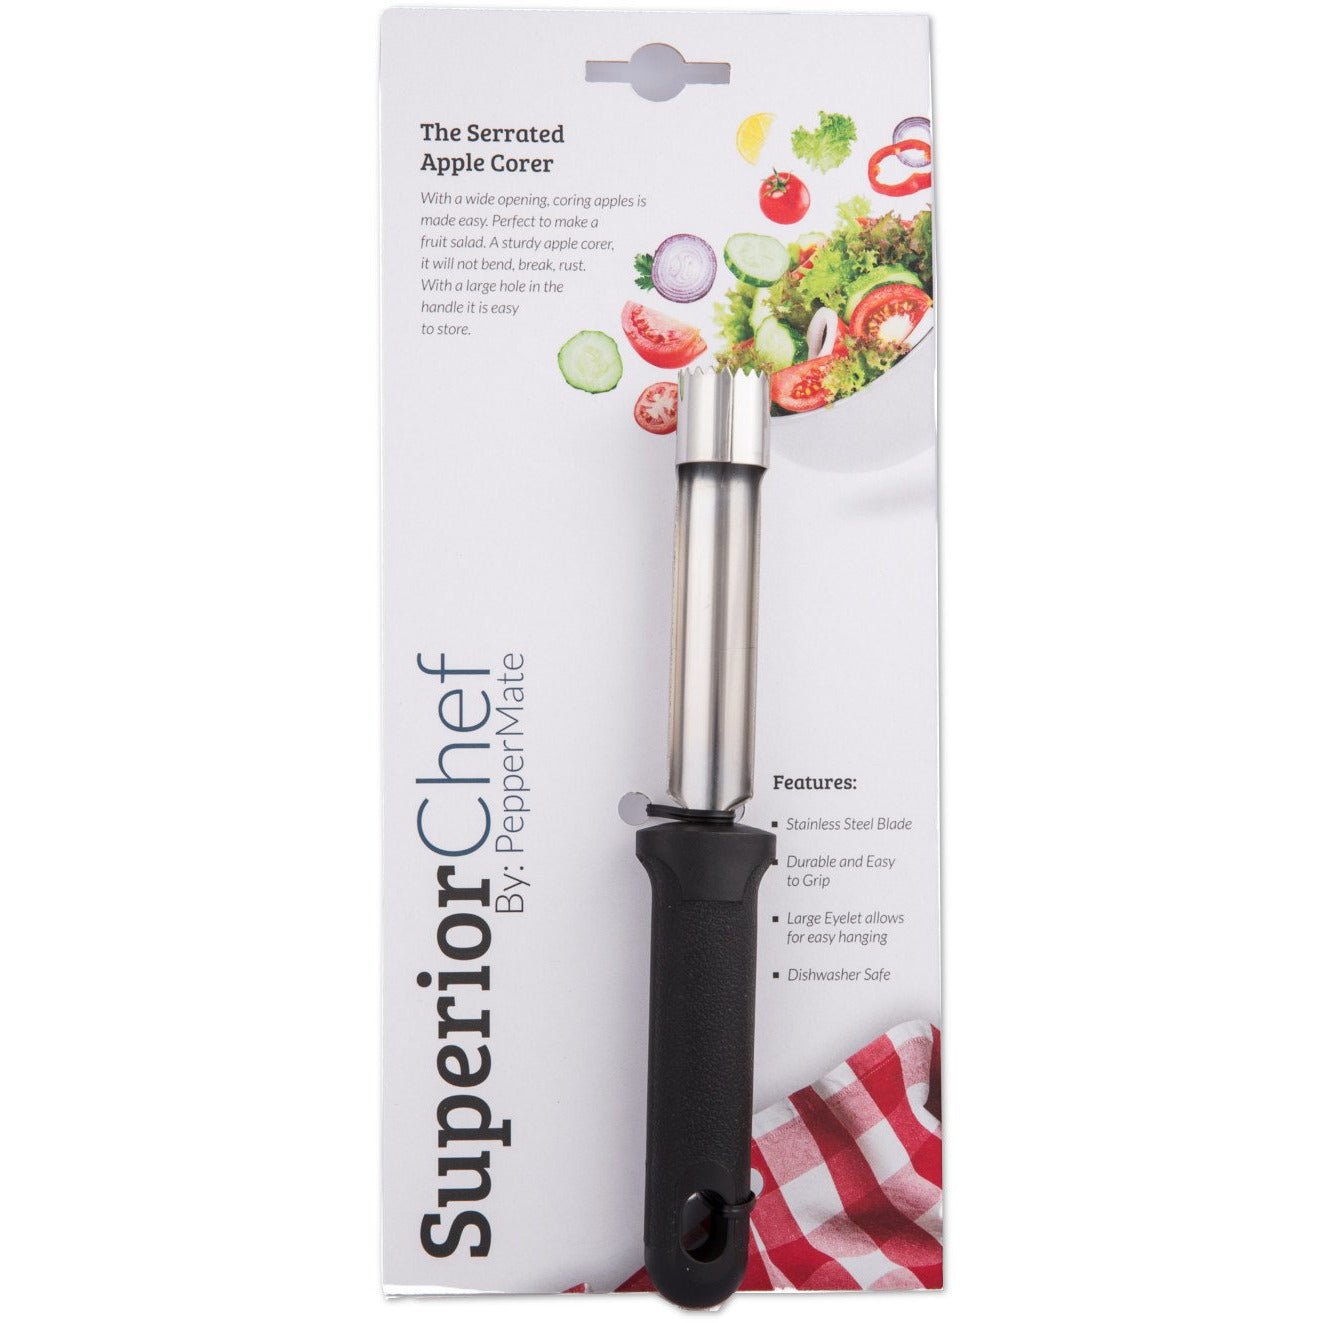 Superior Chef Stainless Steel Serrated Apple Corer